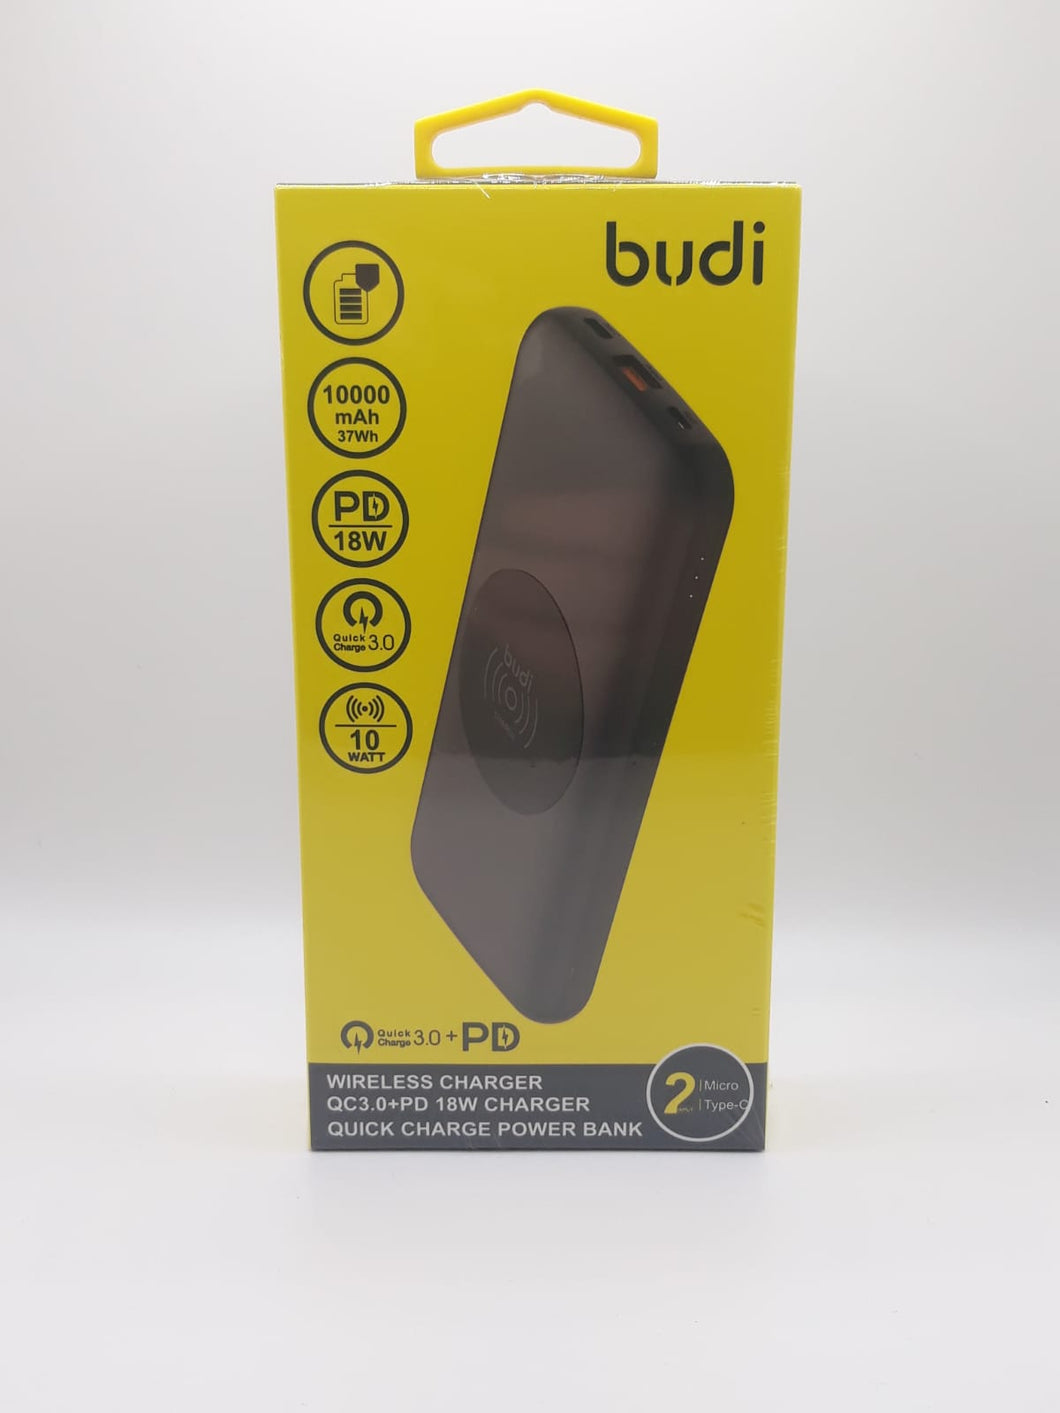 Budi Wireless Powerbank Charger Boost Your Smartphone Tablet